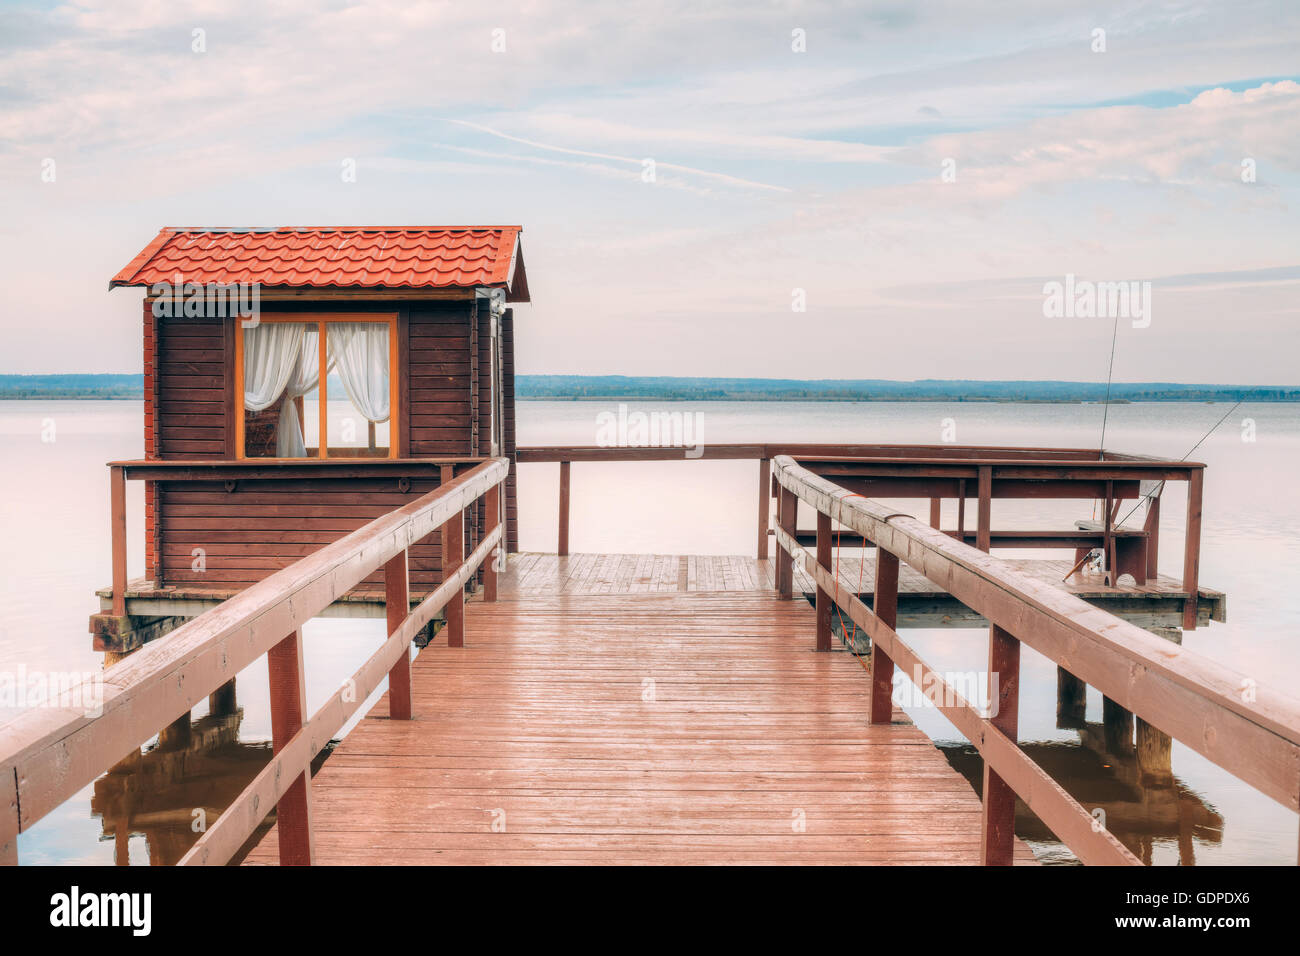 https://c8.alamy.com/comp/GDPDX6/old-wooden-pier-for-fishing-small-house-shed-and-beautiful-lake-or-GDPDX6.jpg